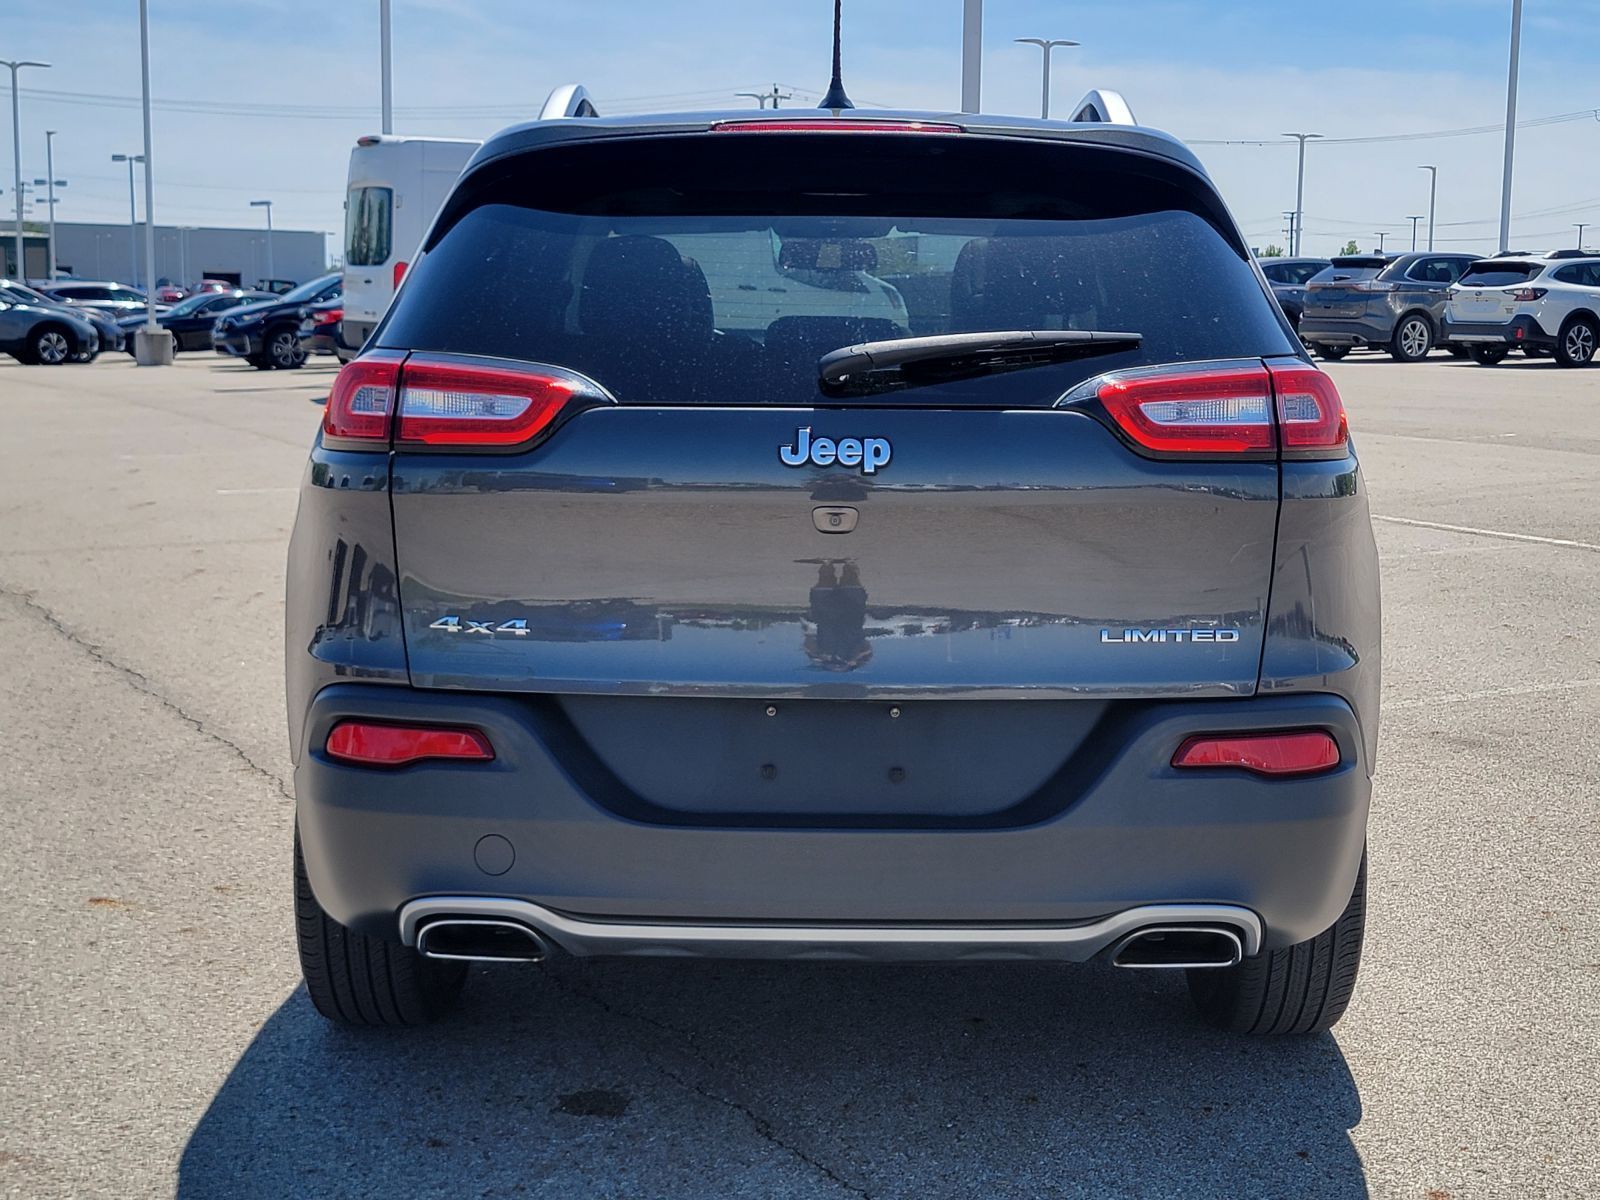 Used, 2015 Jeep Cherokee Limited, Gray, G0699A-13